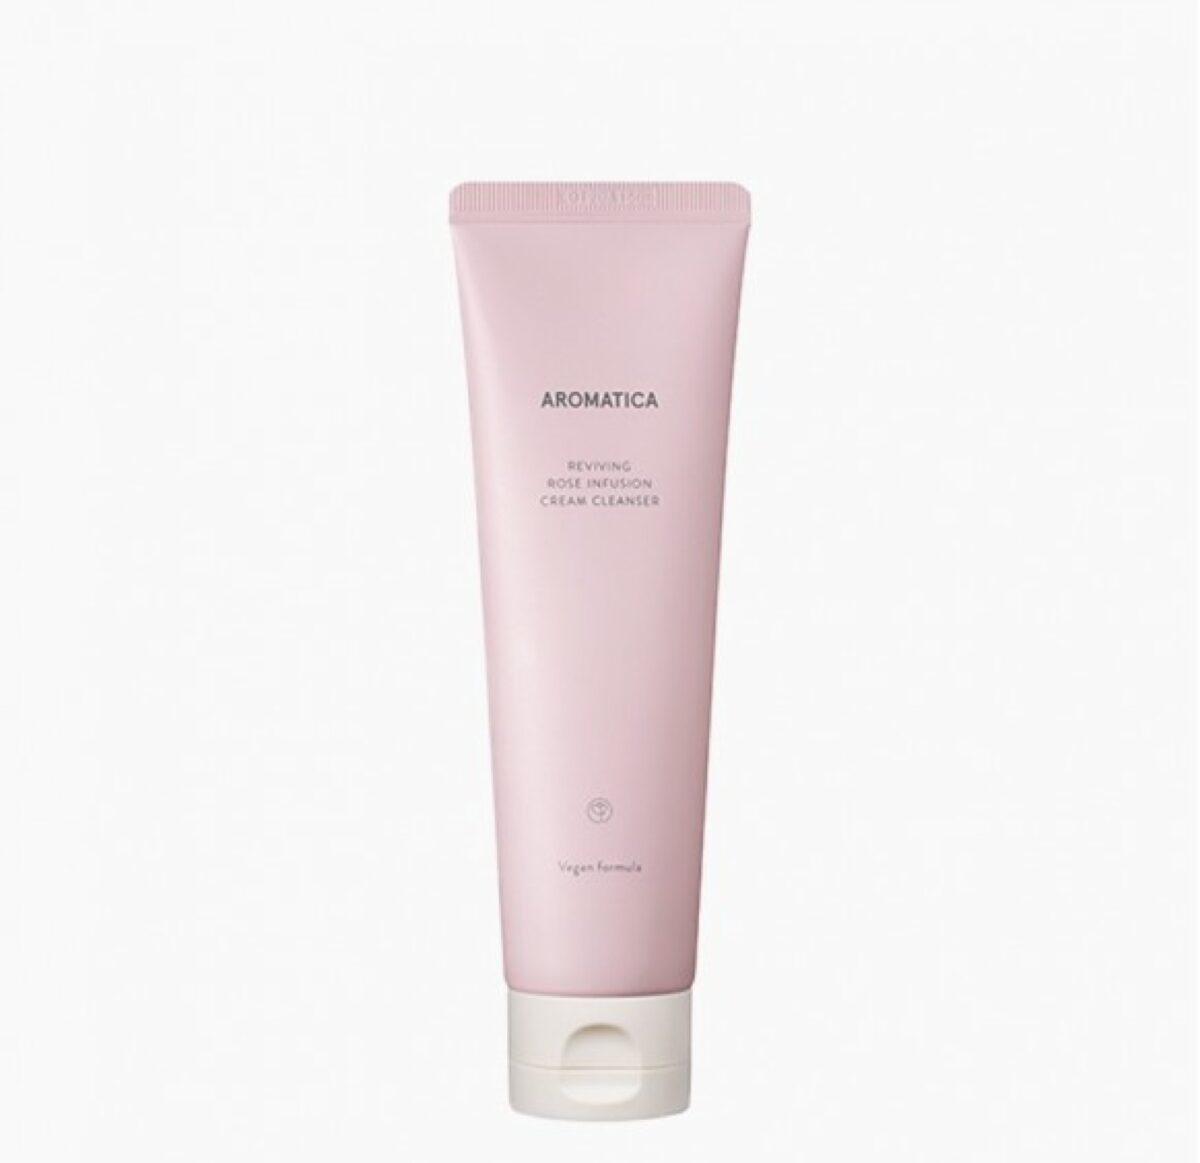 Reviving Rose Infusion Cream Cleanser, Aromatica